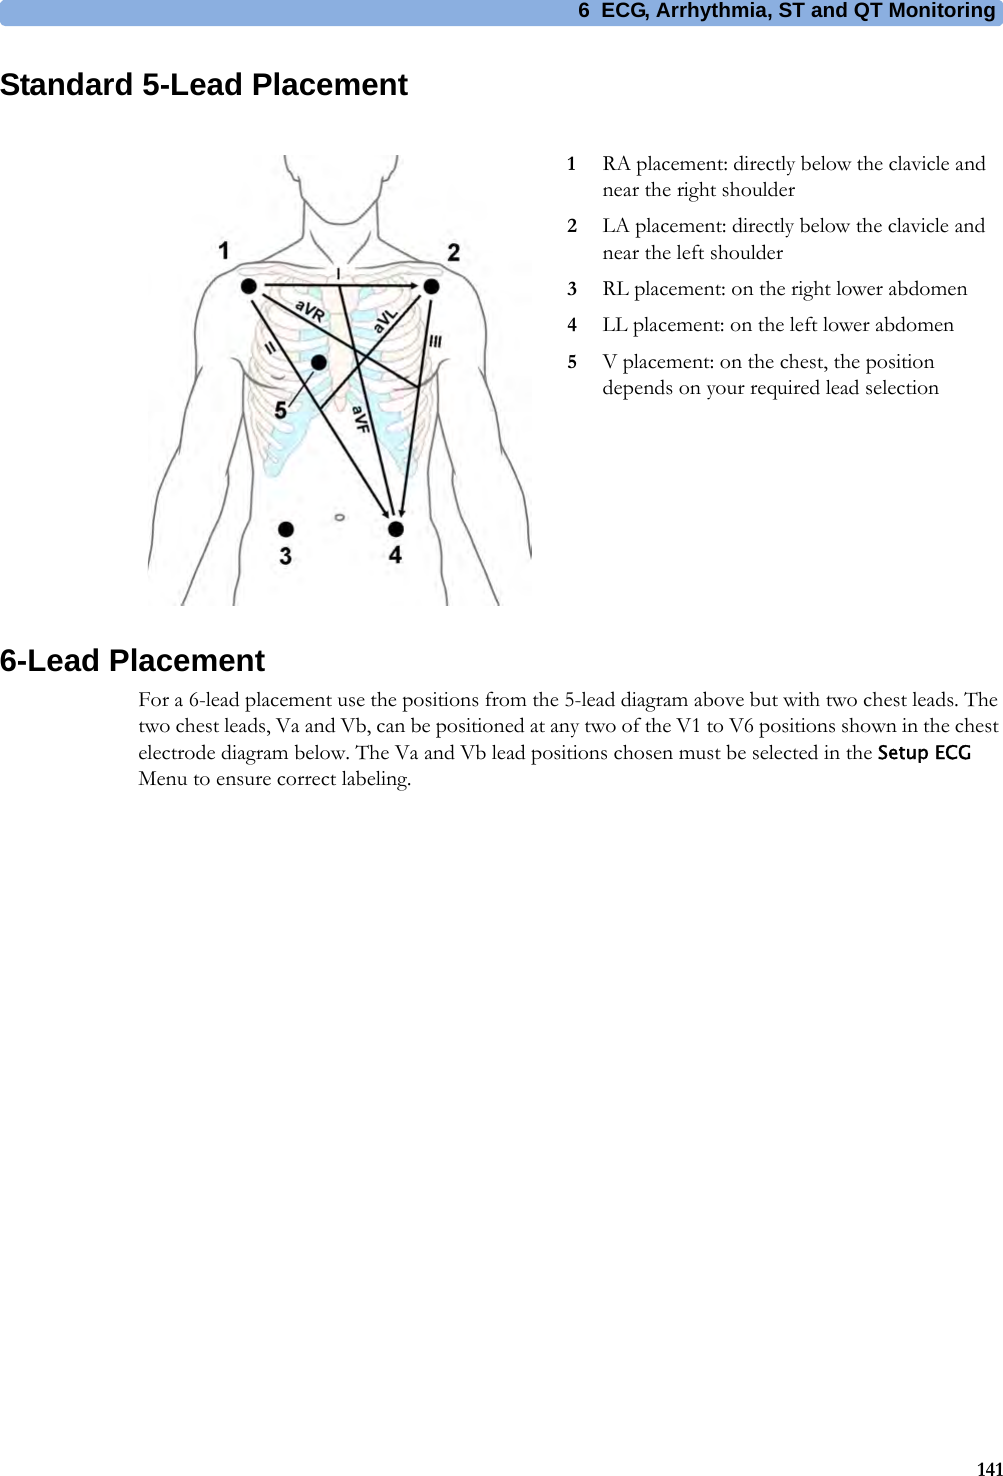 6 ECG, Arrhythmia, ST and QT Monitoring141Standard 5-Lead Placement6-Lead PlacementFor a 6-lead placement use the positions from the 5-lead diagram above but with two chest leads. The two chest leads, Va and Vb, can be positioned at any two of the V1 to V6 positions shown in the chest electrode diagram below. The Va and Vb lead positions chosen must be selected in the Setup ECG Menu to ensure correct labeling.1RA placement: directly below the clavicle and near the right shoulder2LA placement: directly below the clavicle and near the left shoulder3RL placement: on the right lower abdomen4LL placement: on the left lower abdomen5V placement: on the chest, the position depends on your required lead selection